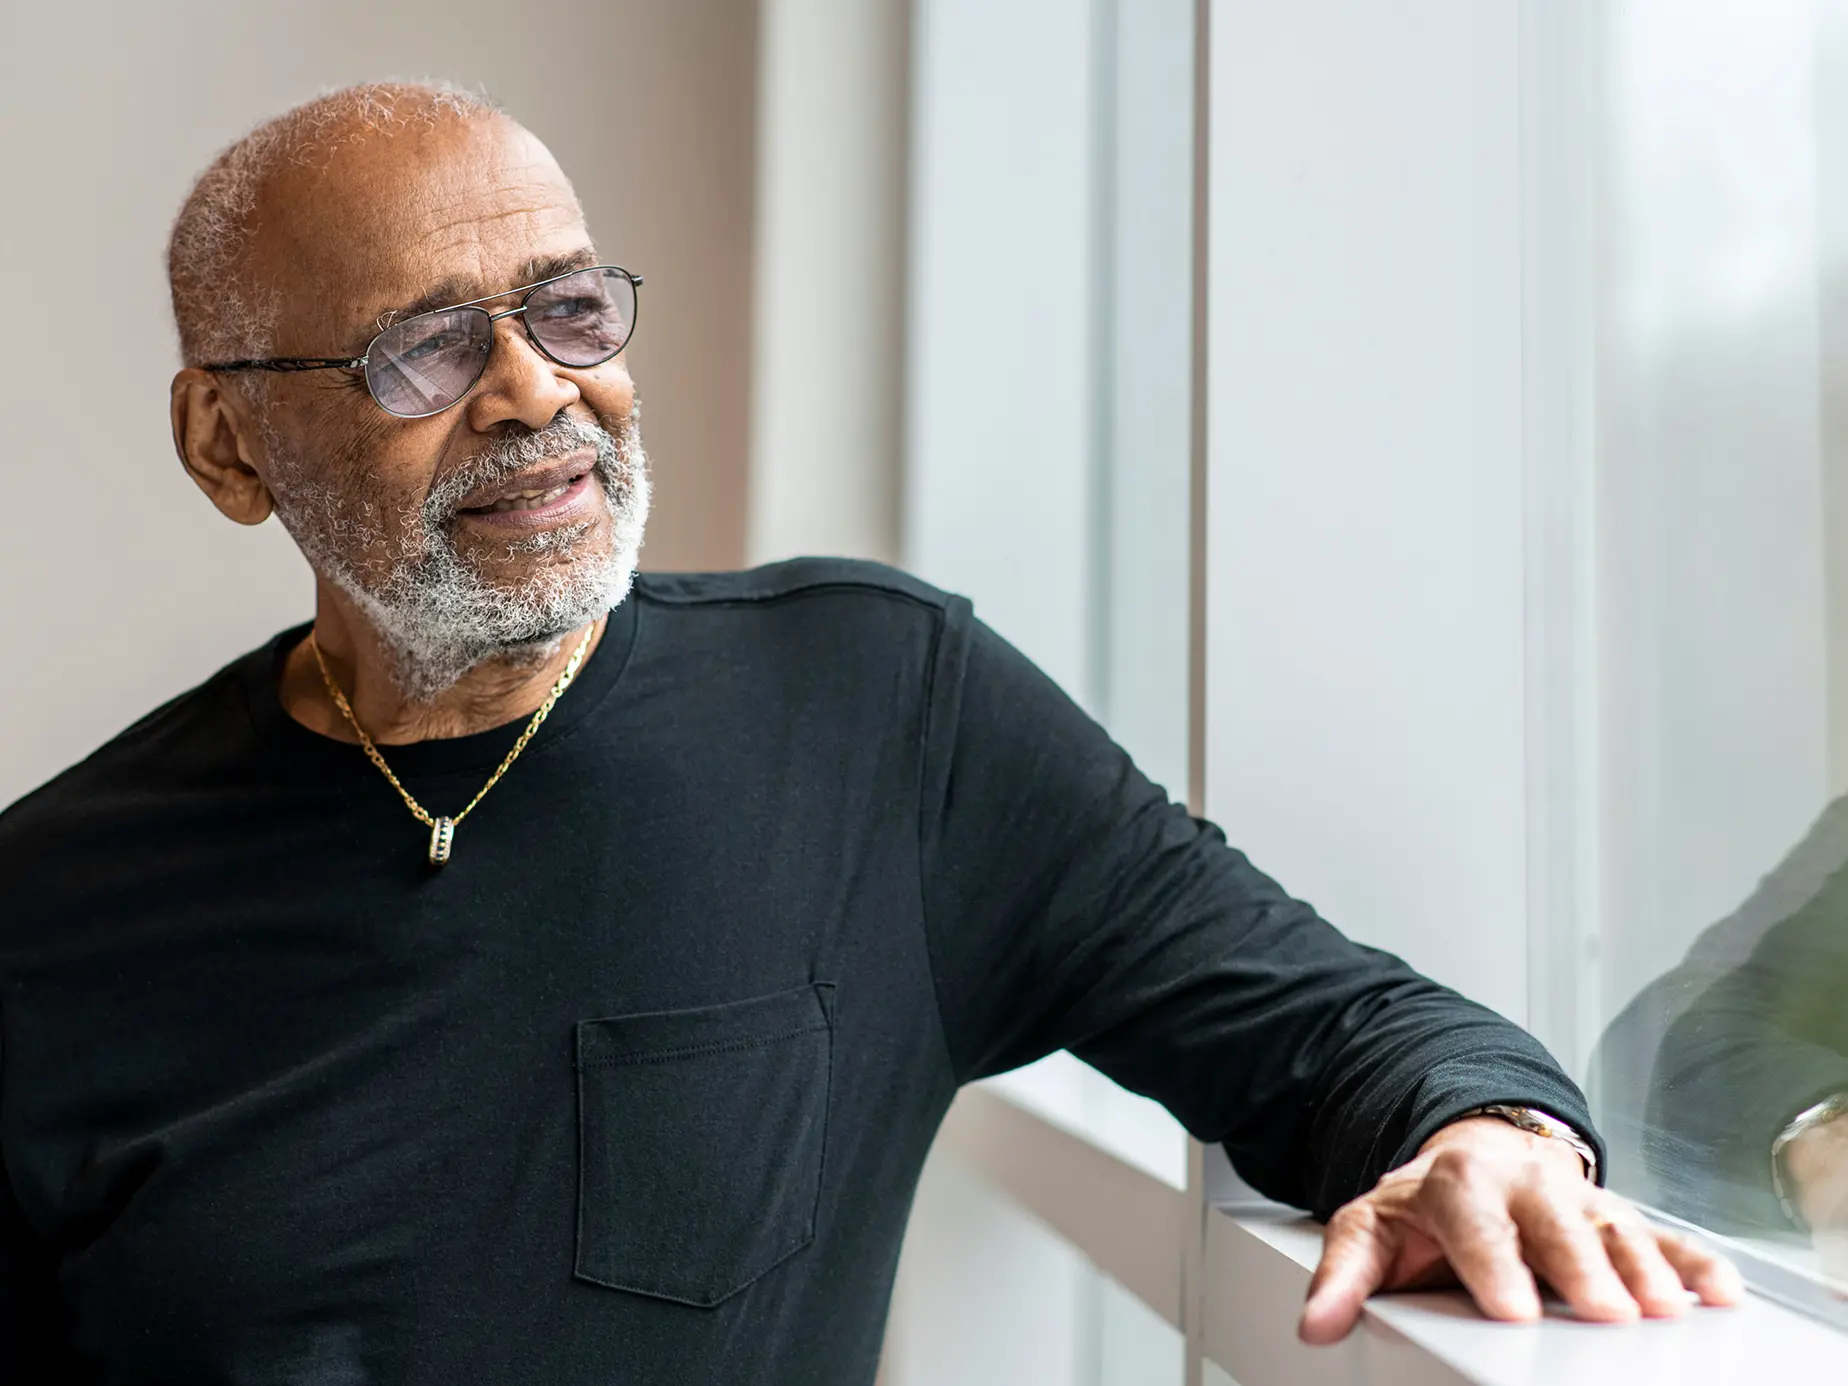 An older black man with gray hair and glasses seems thoughtful as he looks into the distance